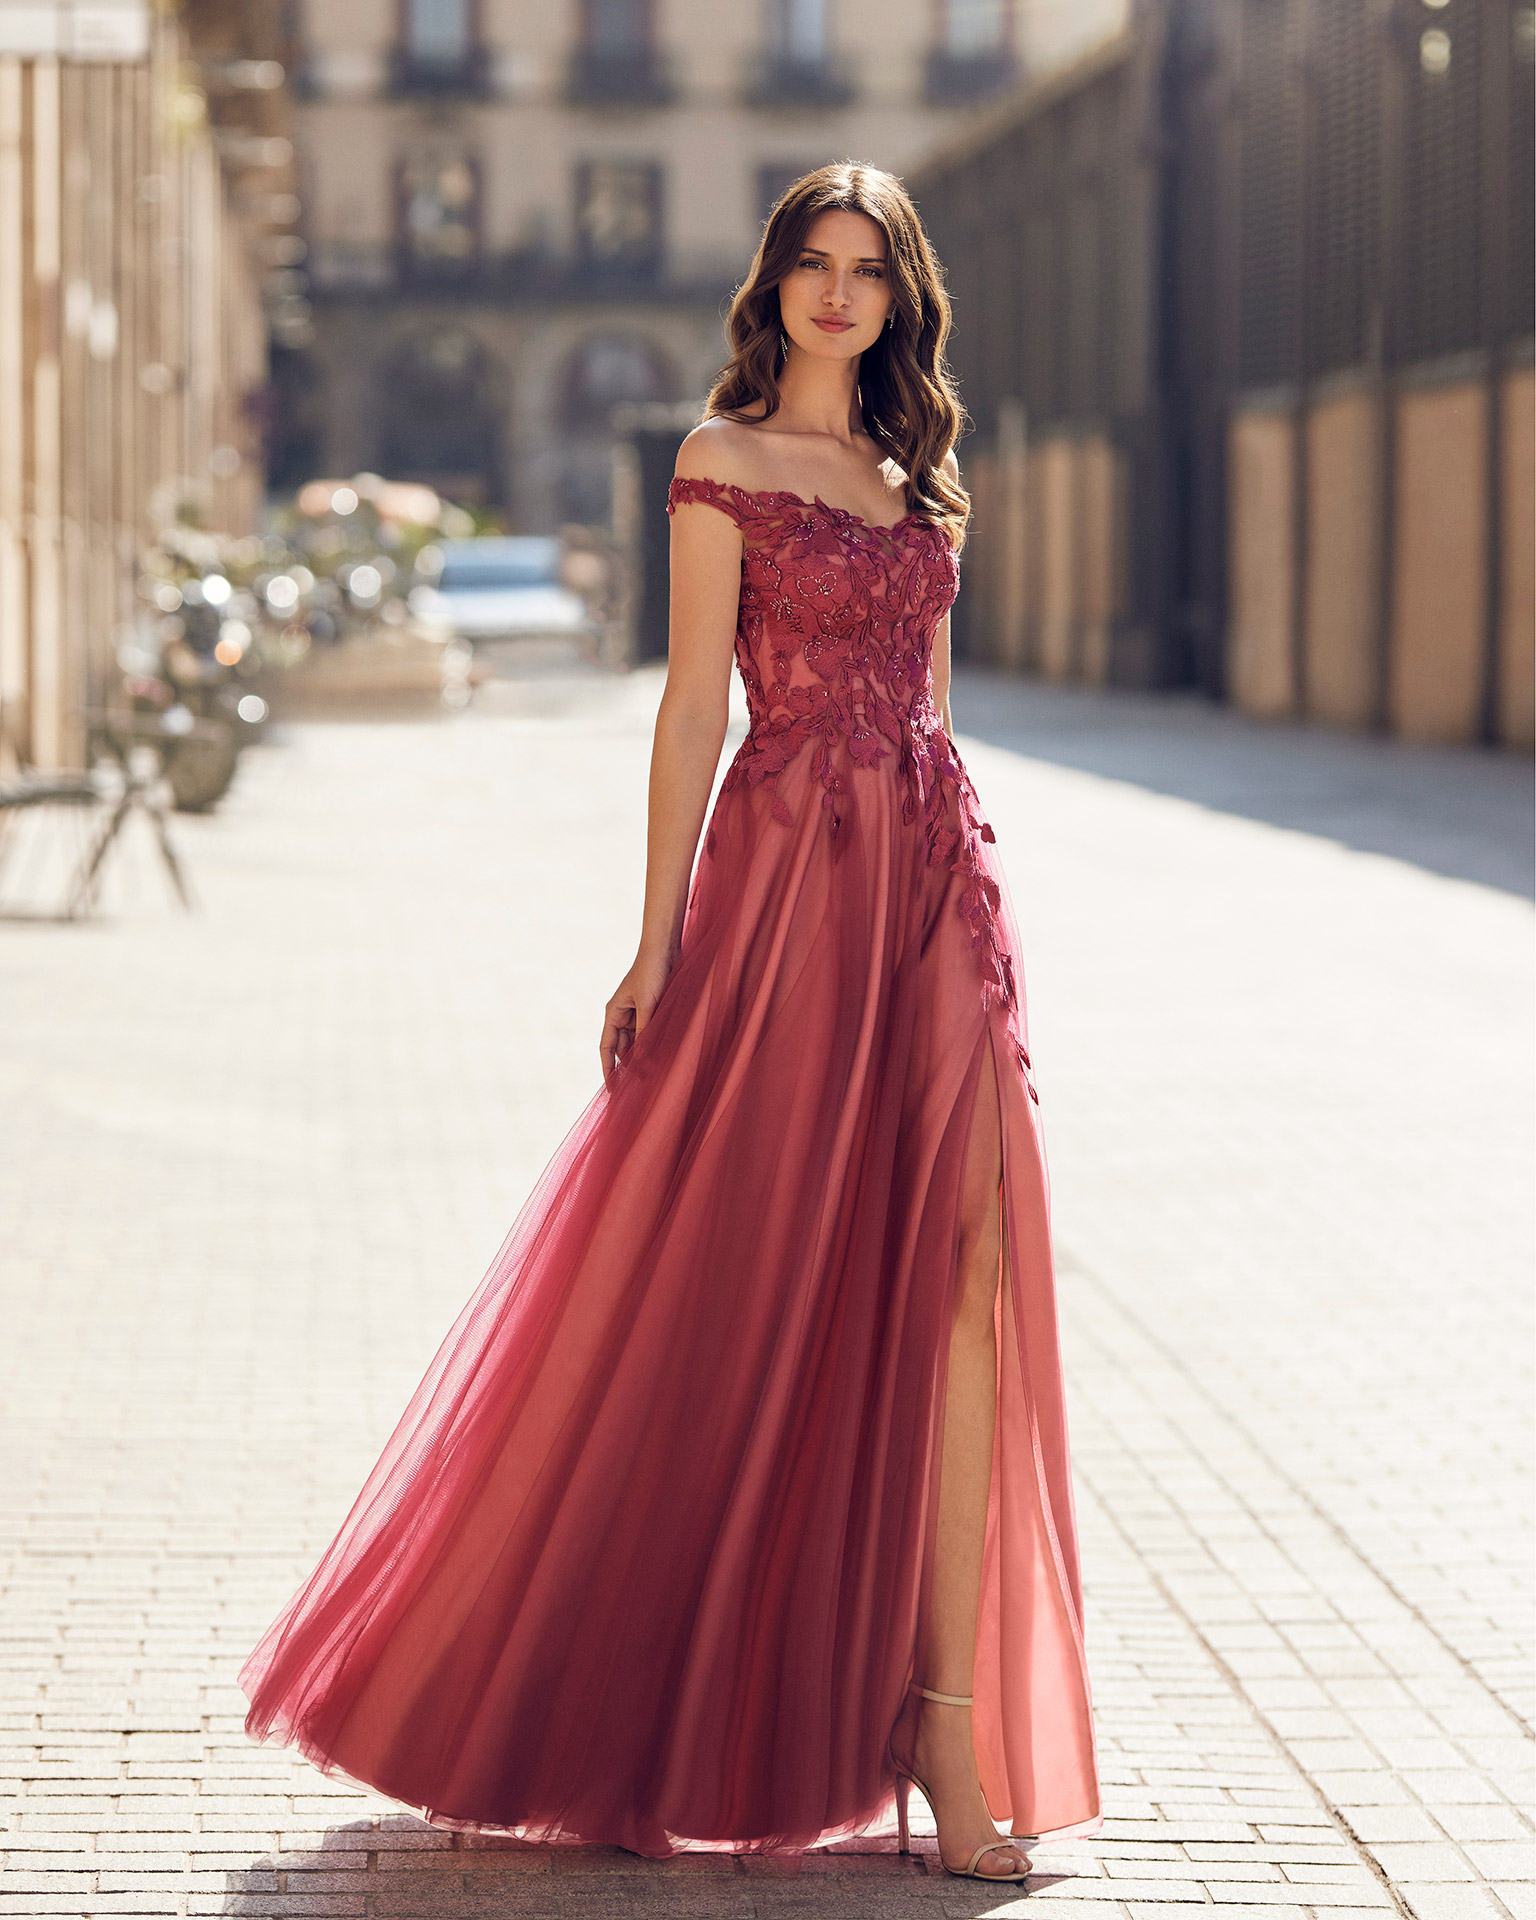 Long princess-style evening dress, made of tulle. Marfil Barcelona design with a beaded lace bodice, a strapless neckline, wraparound sleeves, and an open back. MARFIL_BARCELONA.